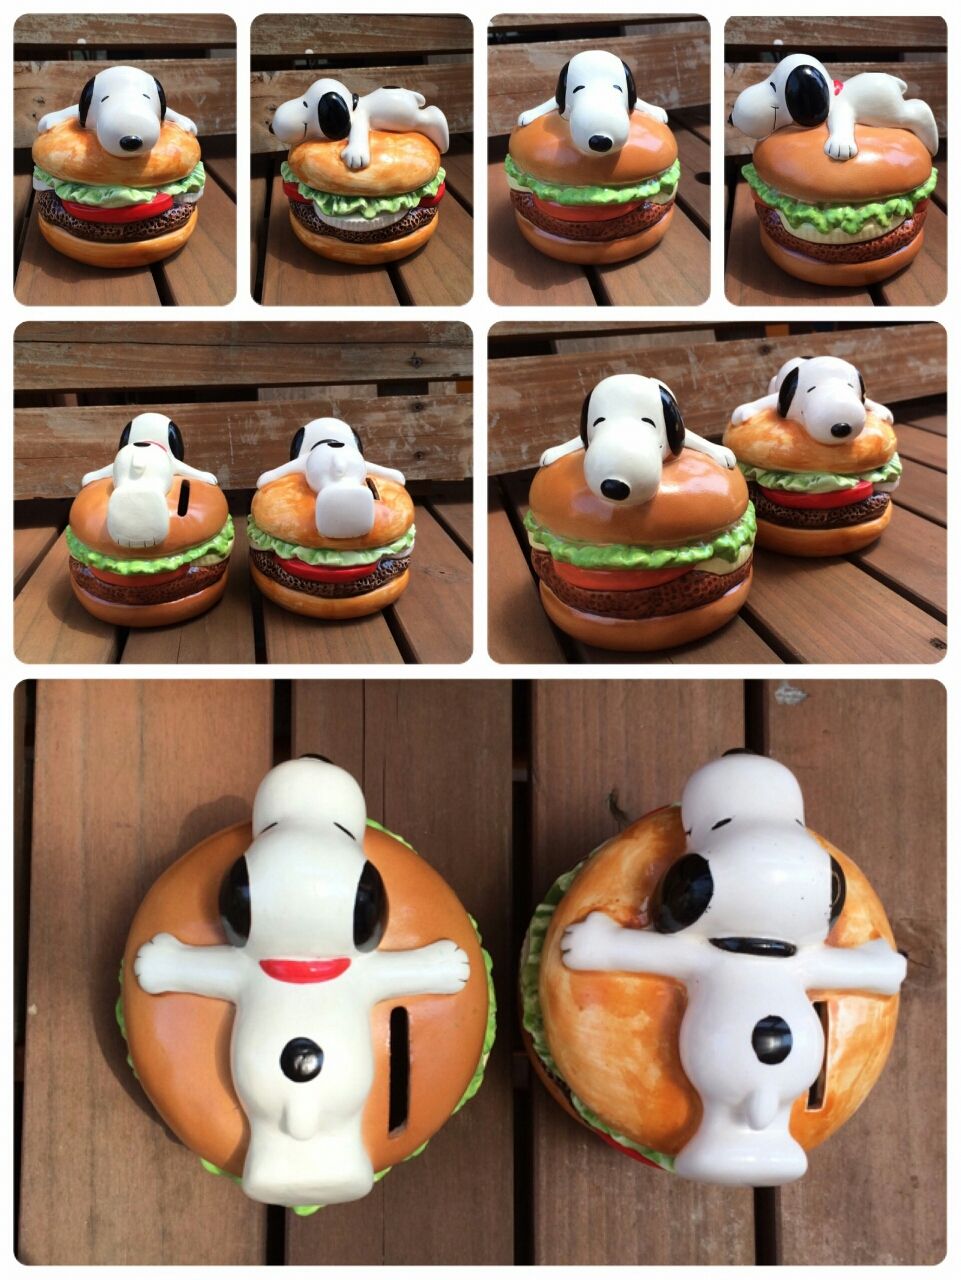 Snoopy Hamburger Junk Food Series 19 The Old Snoopy Collection